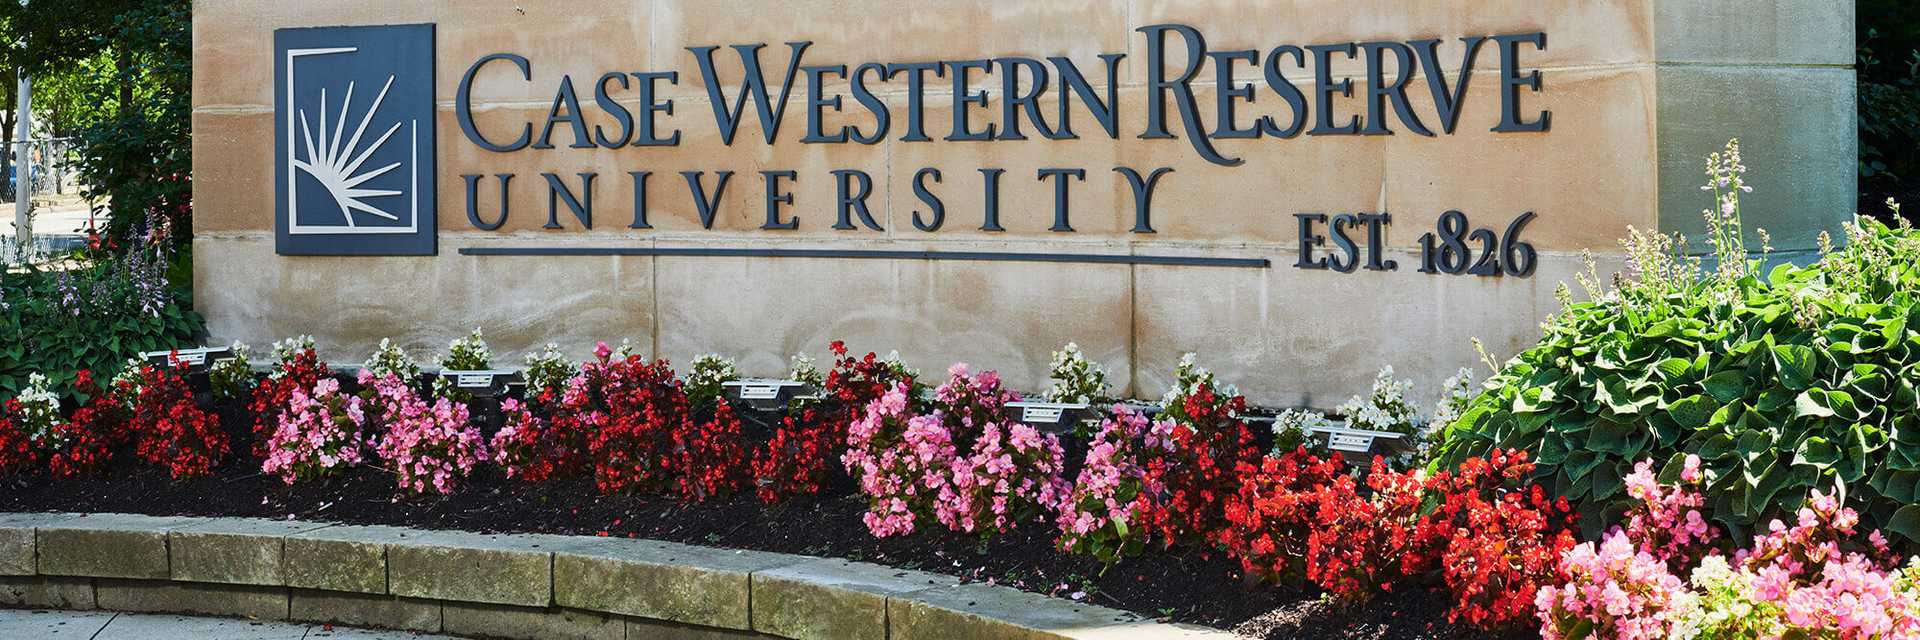 Photo of a stone sign on campus with the Case Western Reserve University logo, with flowers beneath